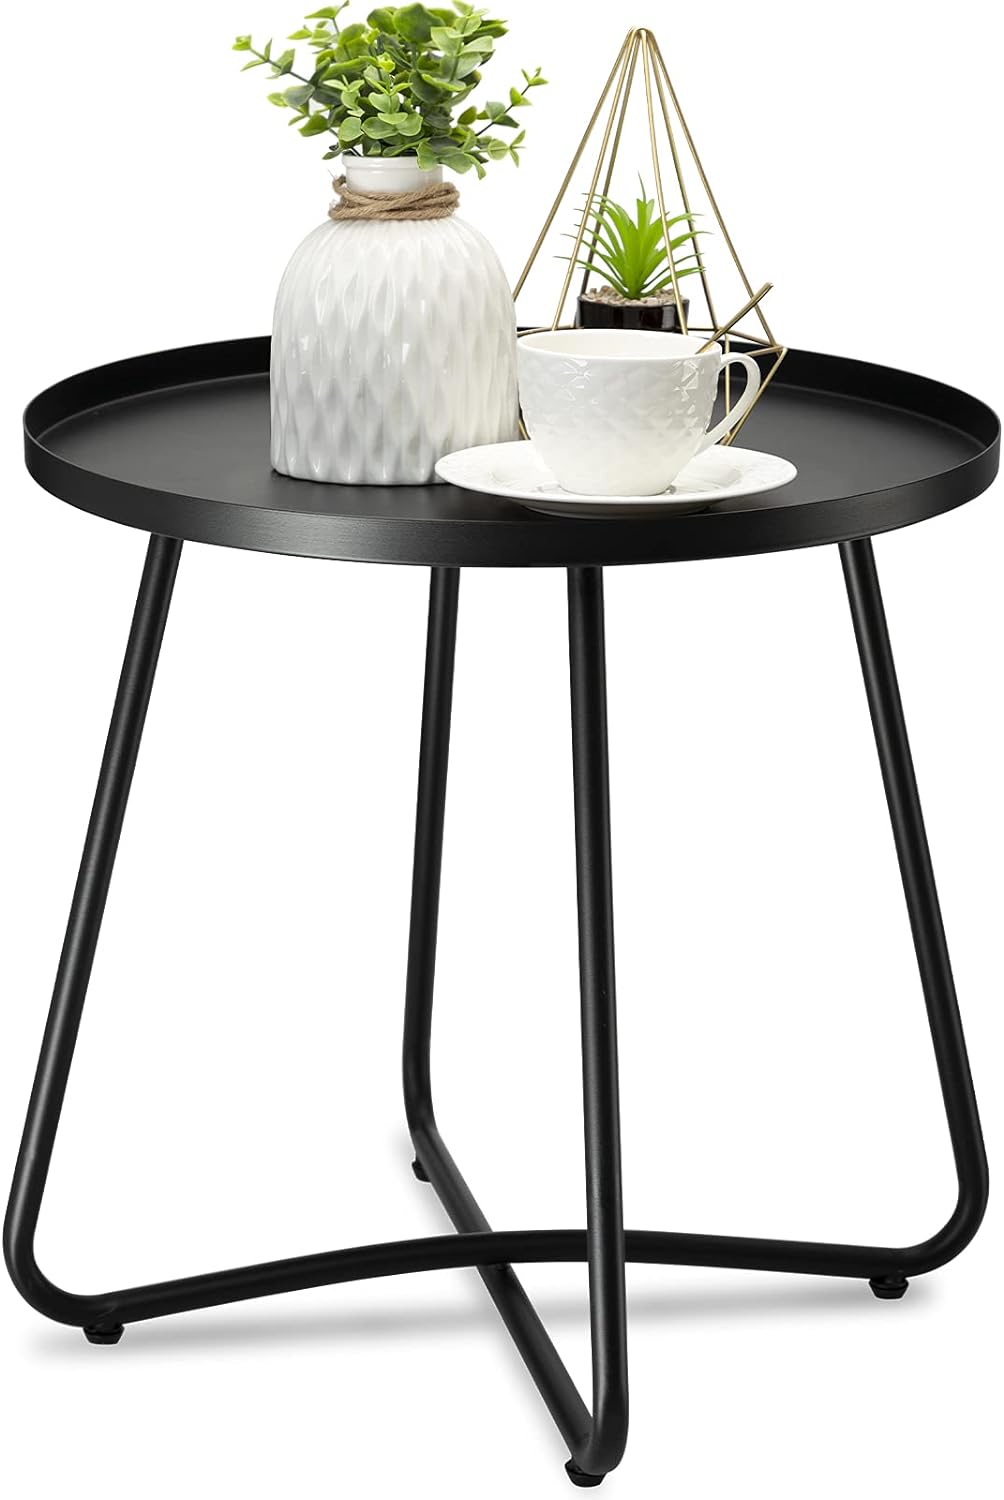 danpinera Outdoor Side Table, Small Round End Table with Weather Resistant Steel for Patio,Yard,Balcony,Garden - Black - image 1 of 9